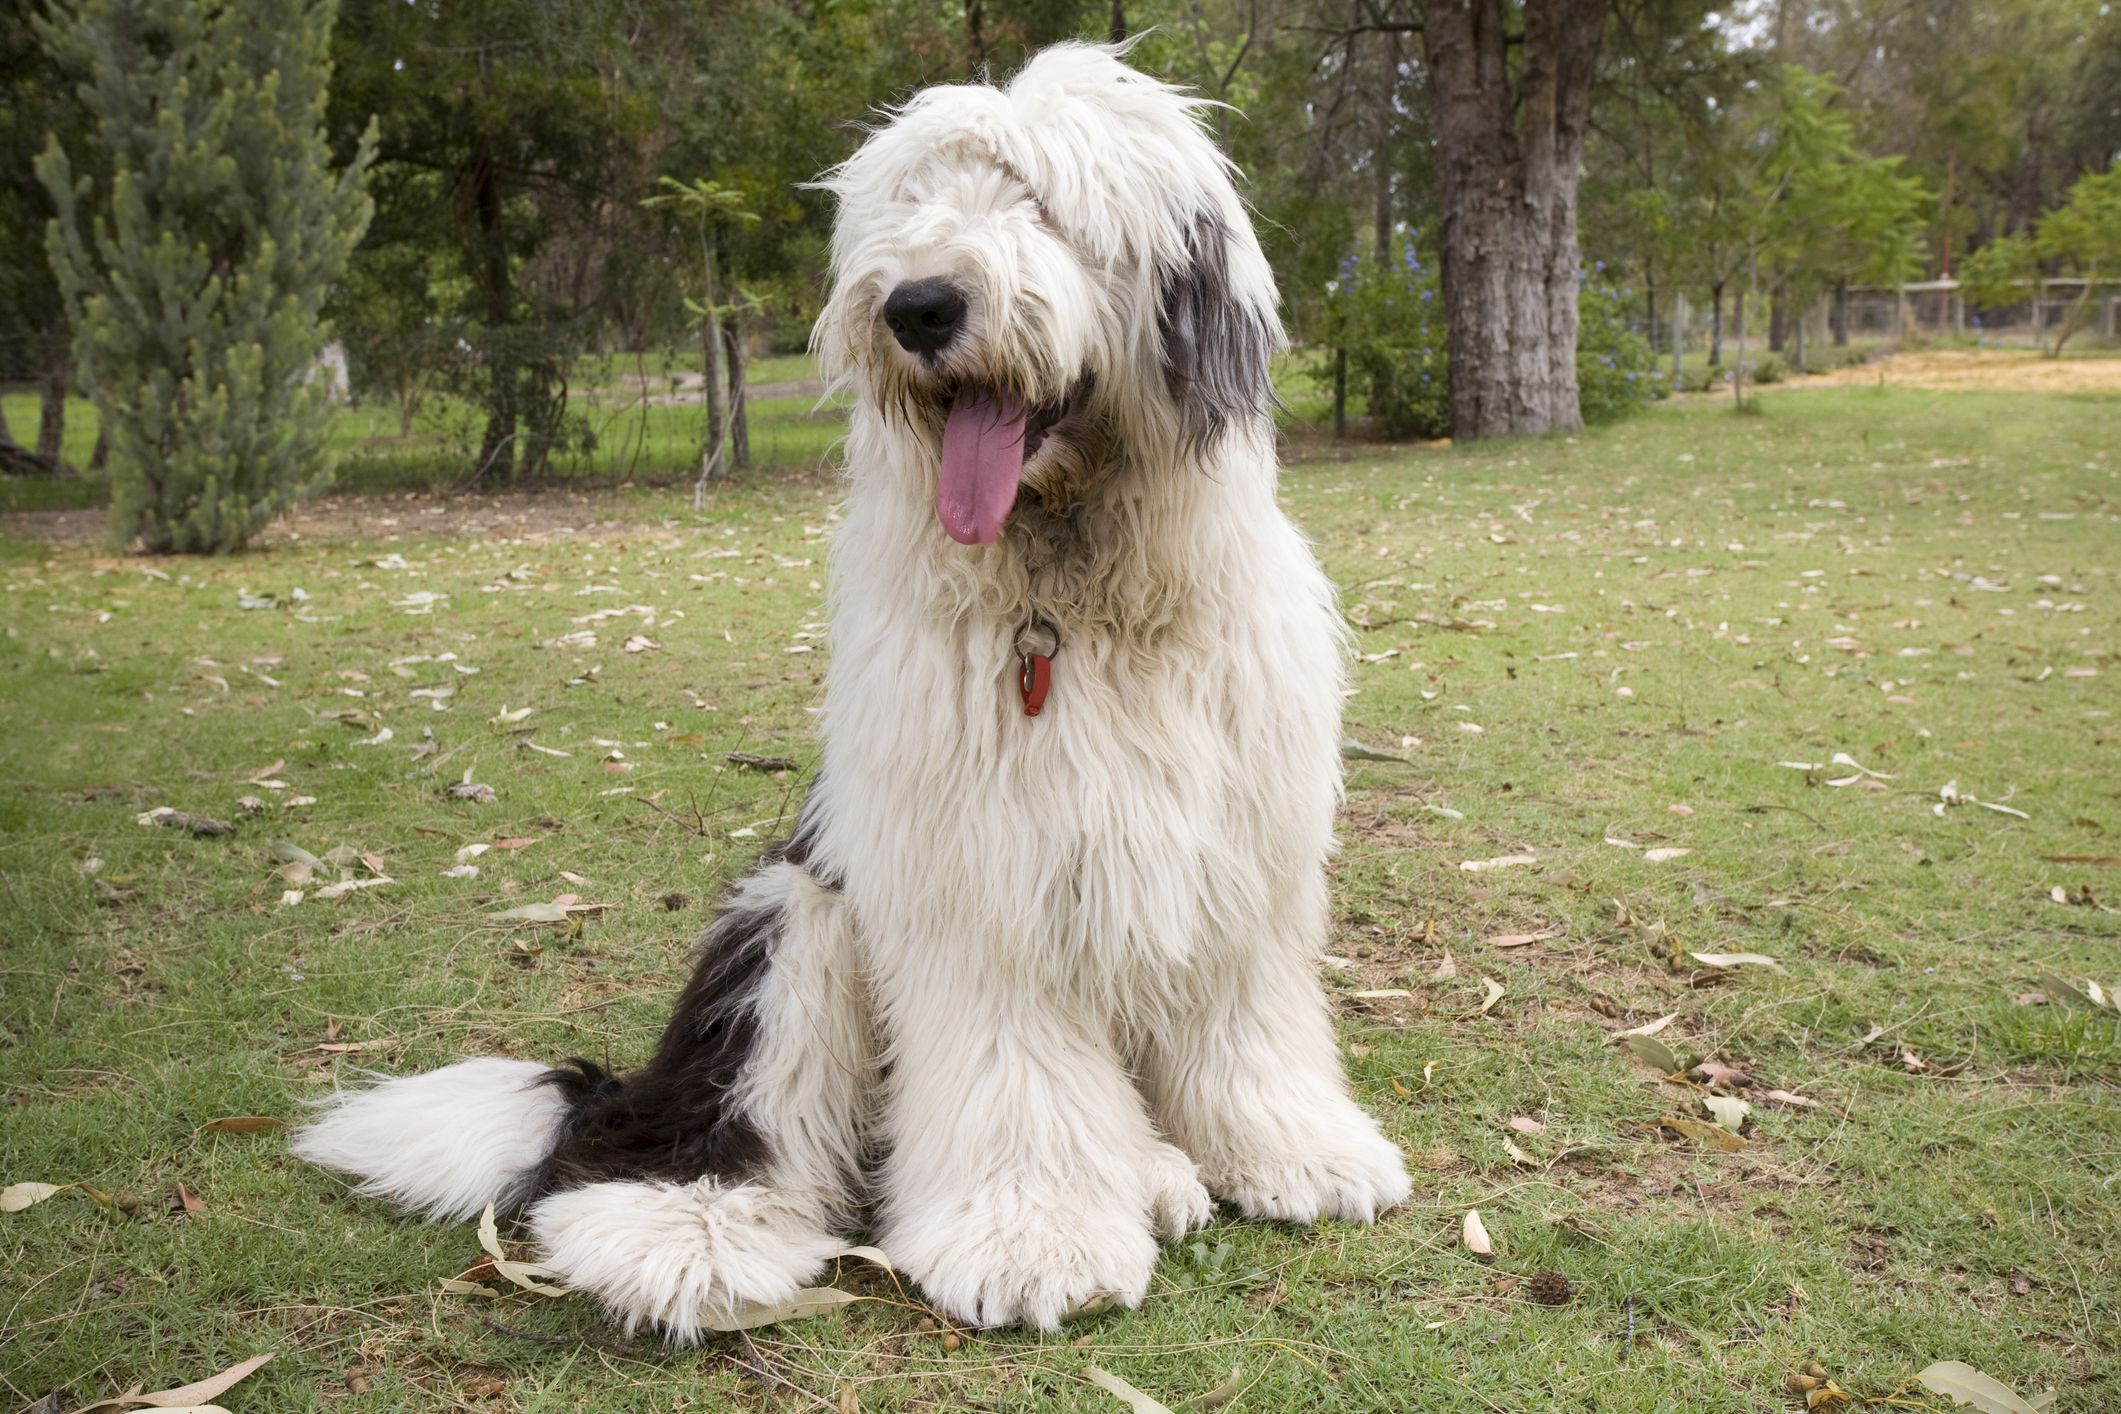 15 Long-Haired Dog Breeds That Anyone Would Envy